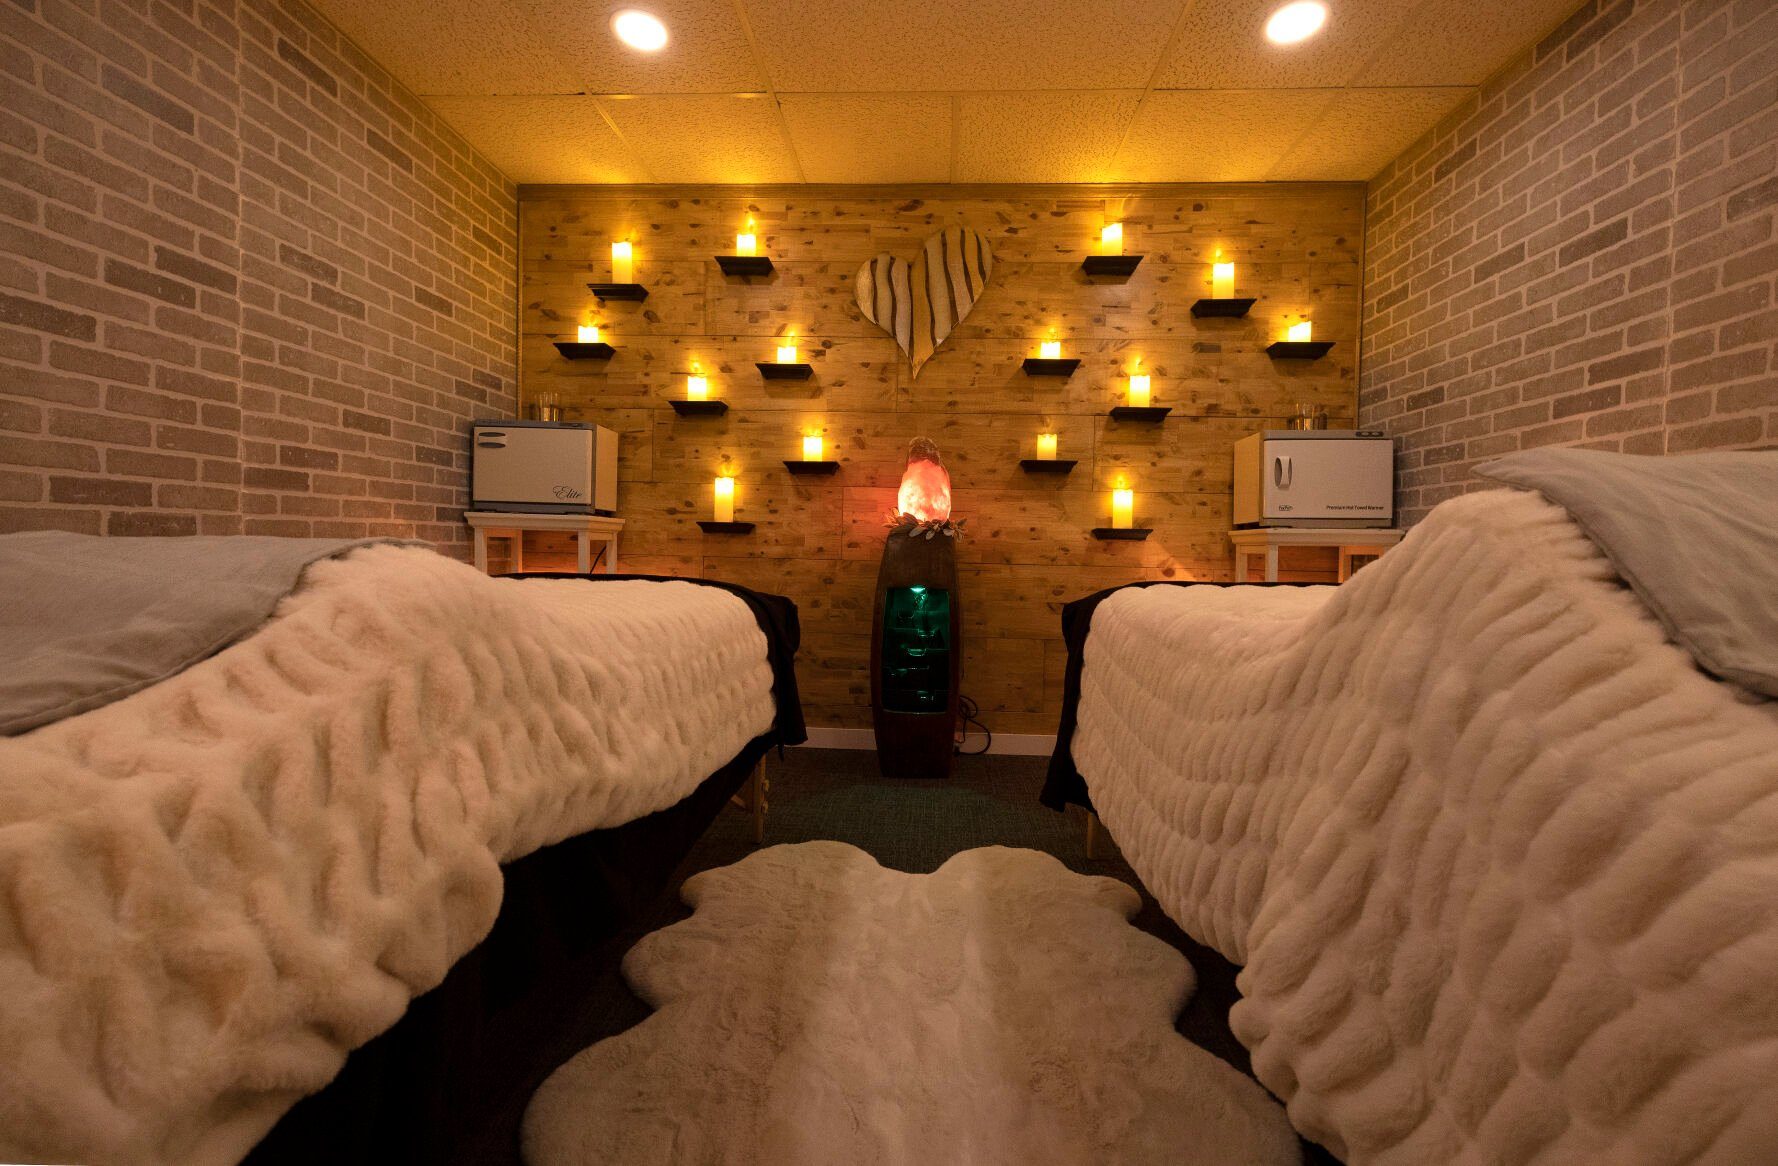 A couples massage therapy room at White Sage Day Spa in Dubuque.    PHOTO CREDIT: Stephen Gassman